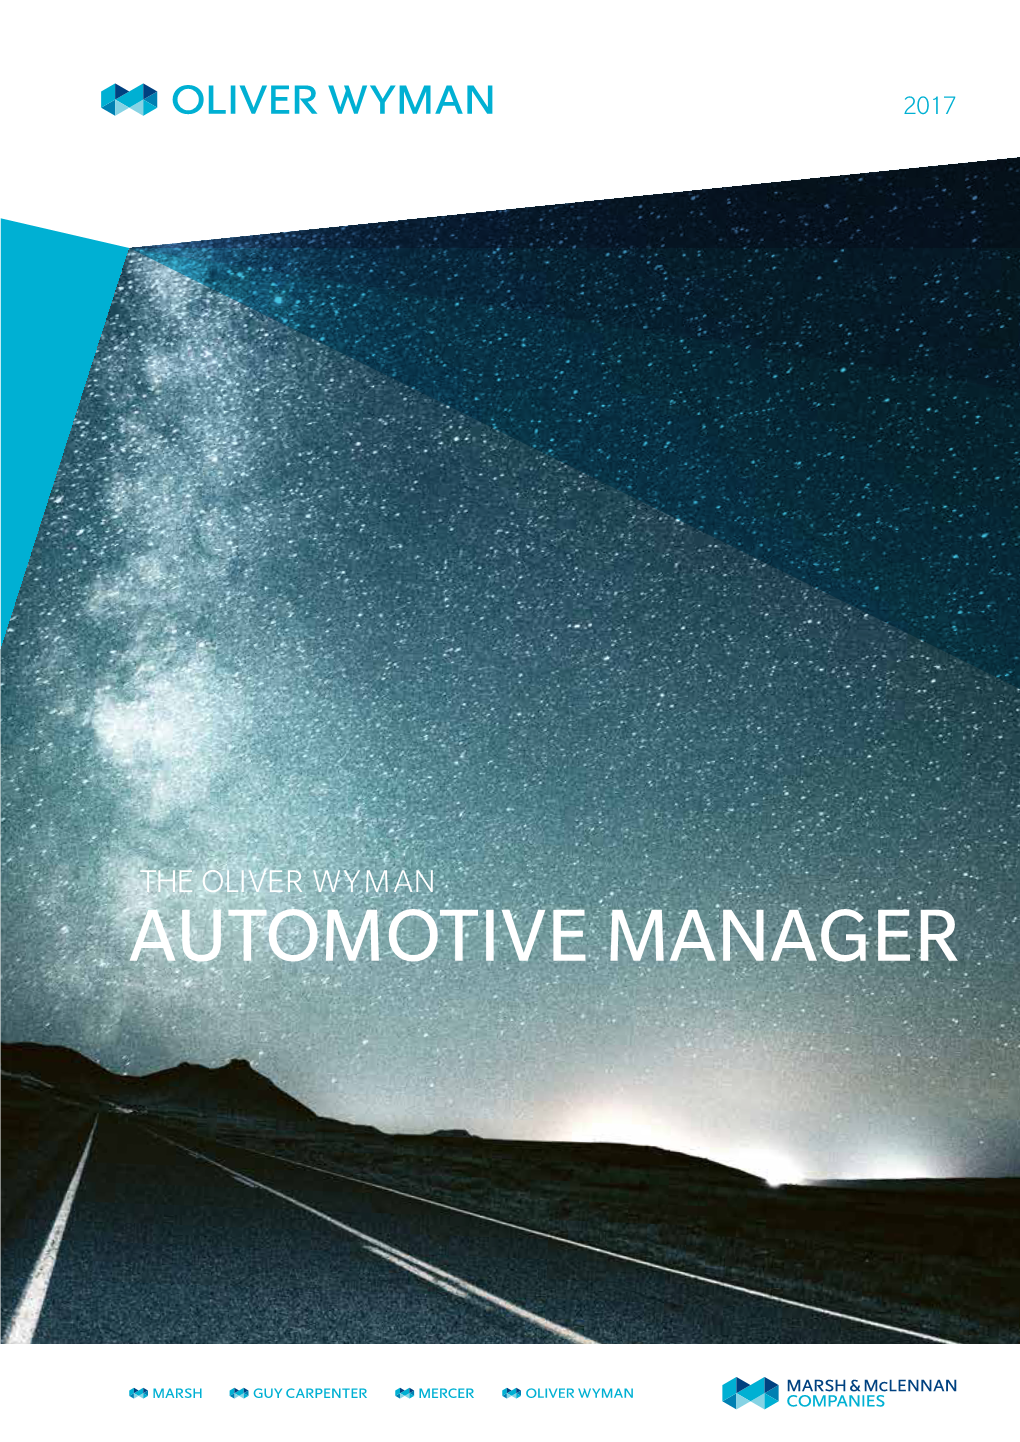 The Oliver Wyman Automotive Manager